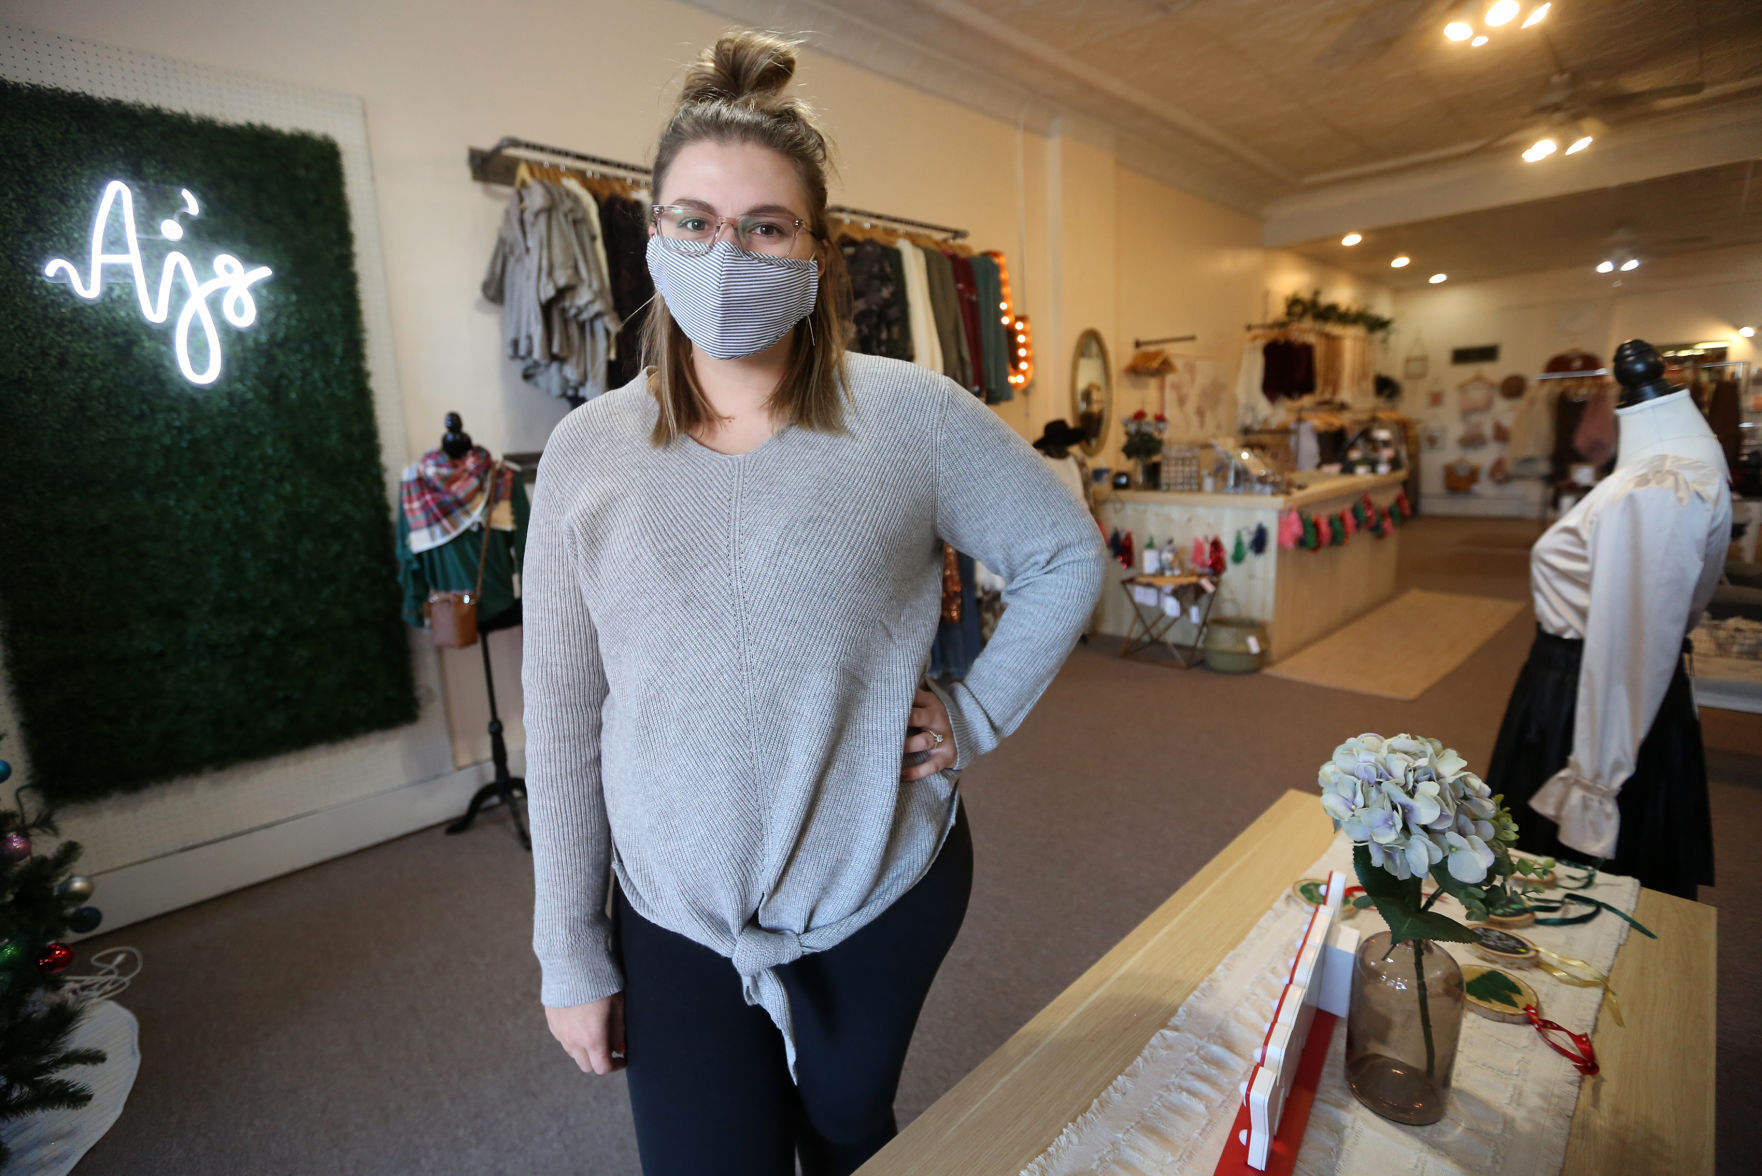 Amanda Kaiser owns AJ’s Boutique at 129 Main St. in Dubuque. The new business sells dresses, shirts, sweaters, pants and a wide variety of accessories geared toward women, in sizes ranging from extra small to 3XL. PHOTO CREDIT: JESSICA REILLY